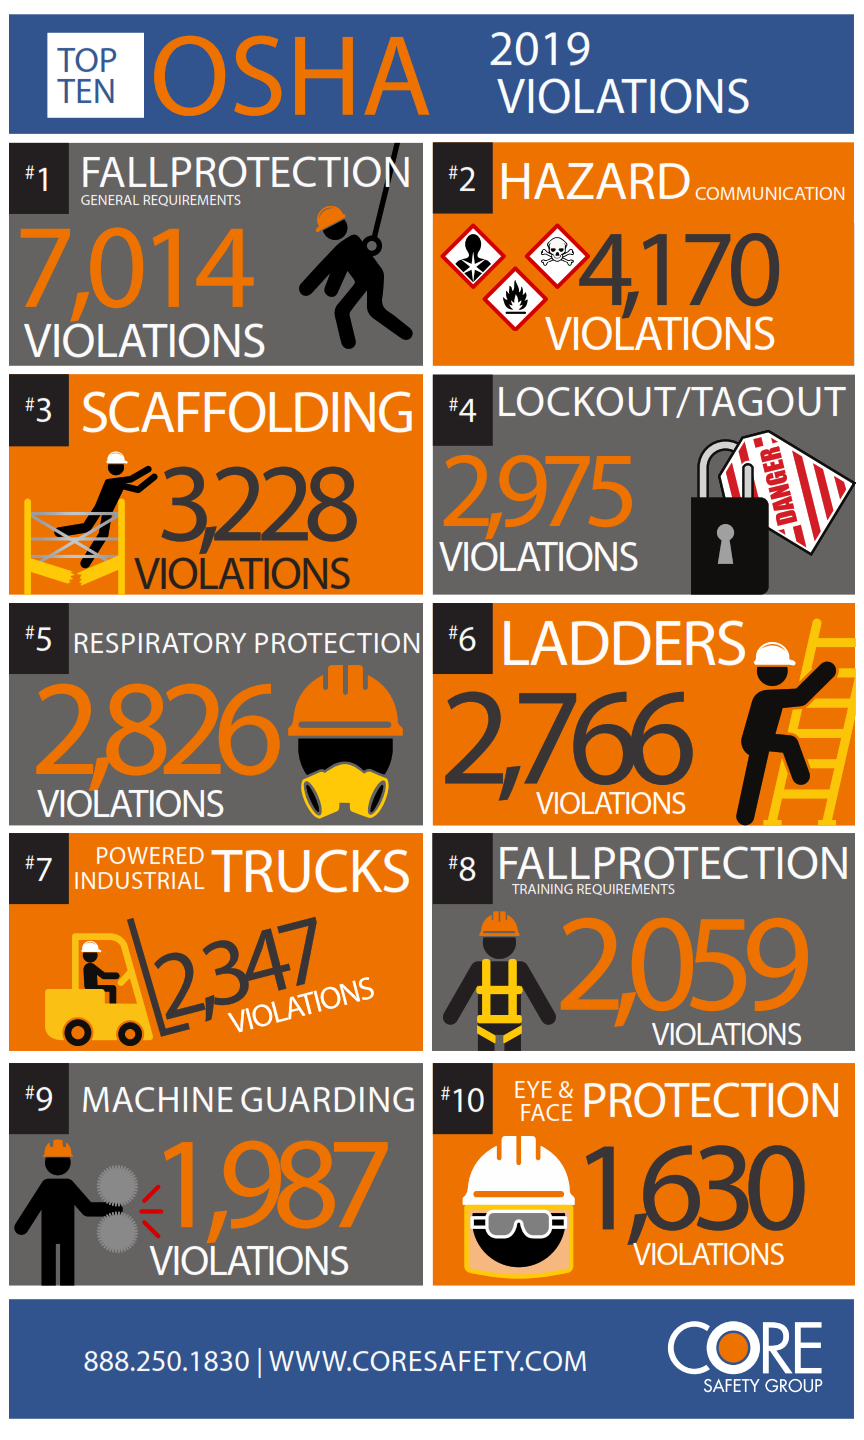 OSHA’s Top 10 Most Cited Violations for 2019